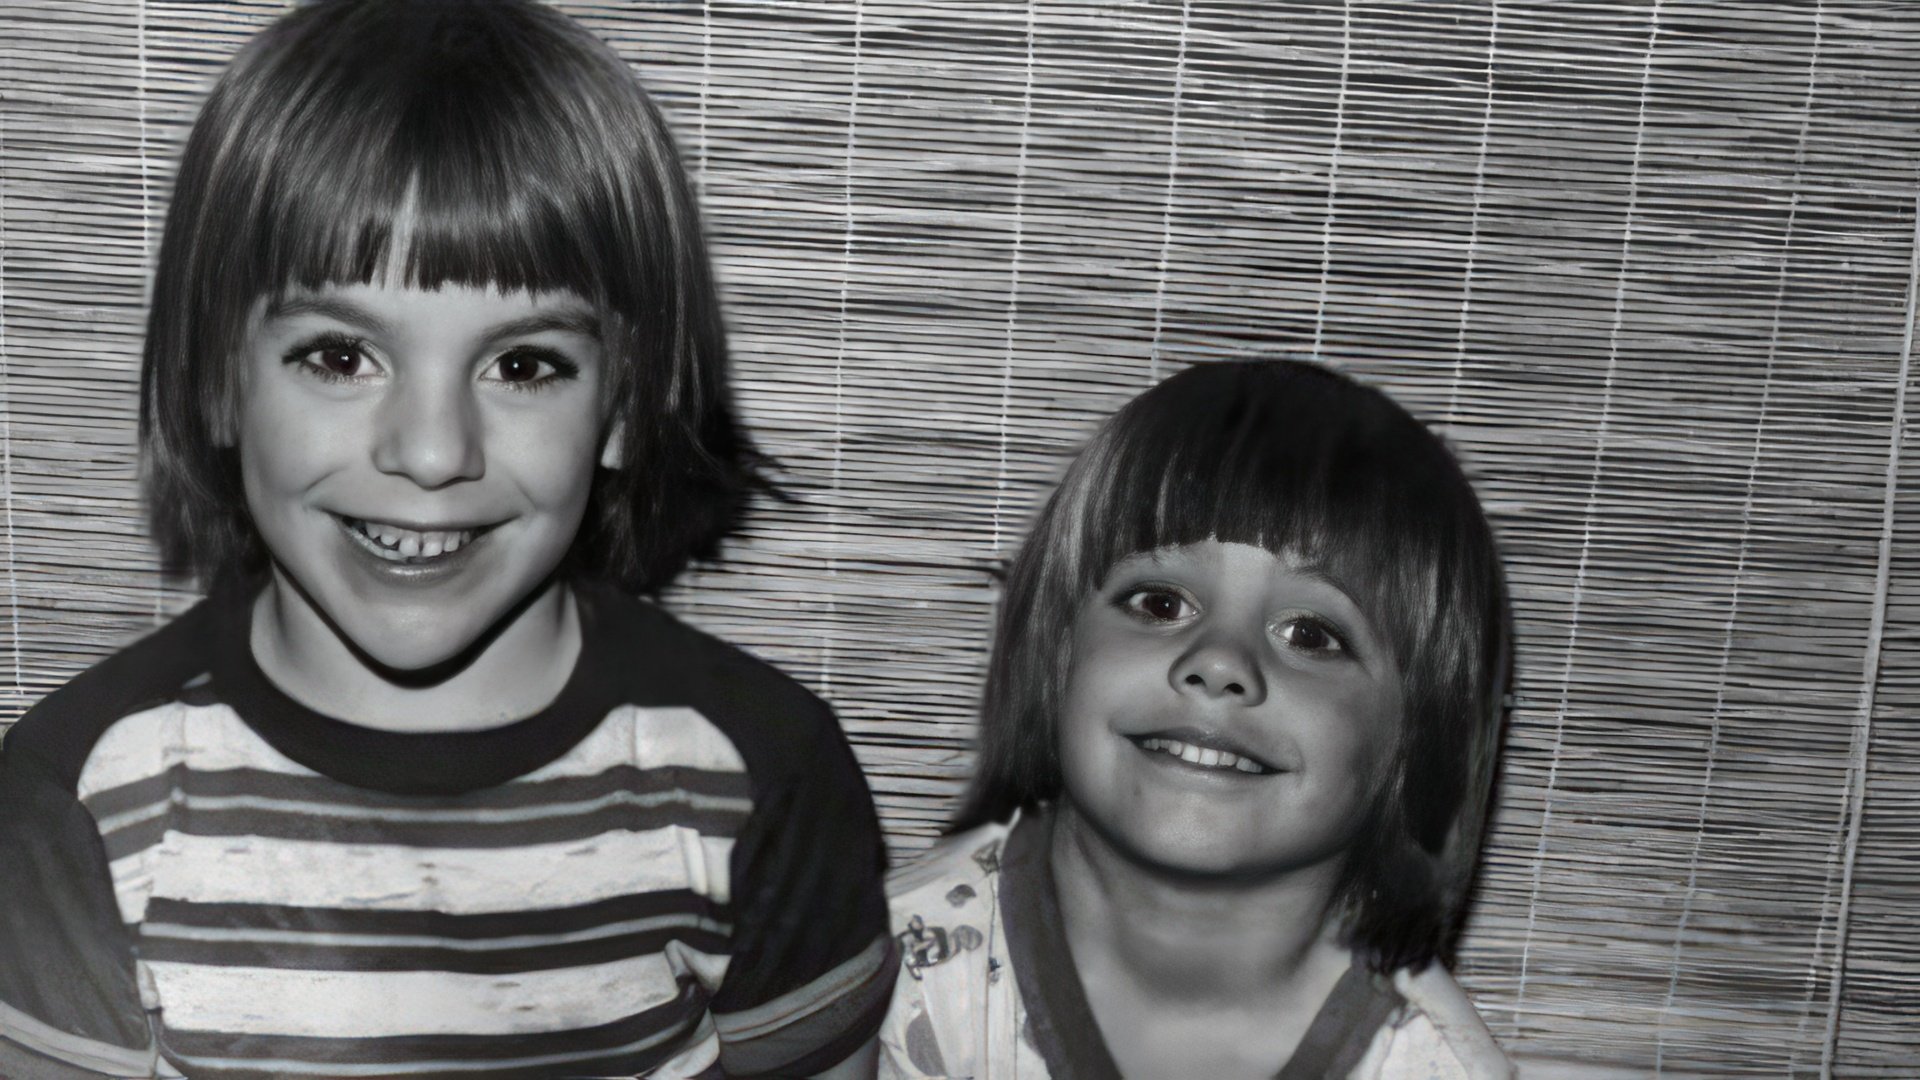 Jared Leto and his older brother Shannon in childhood